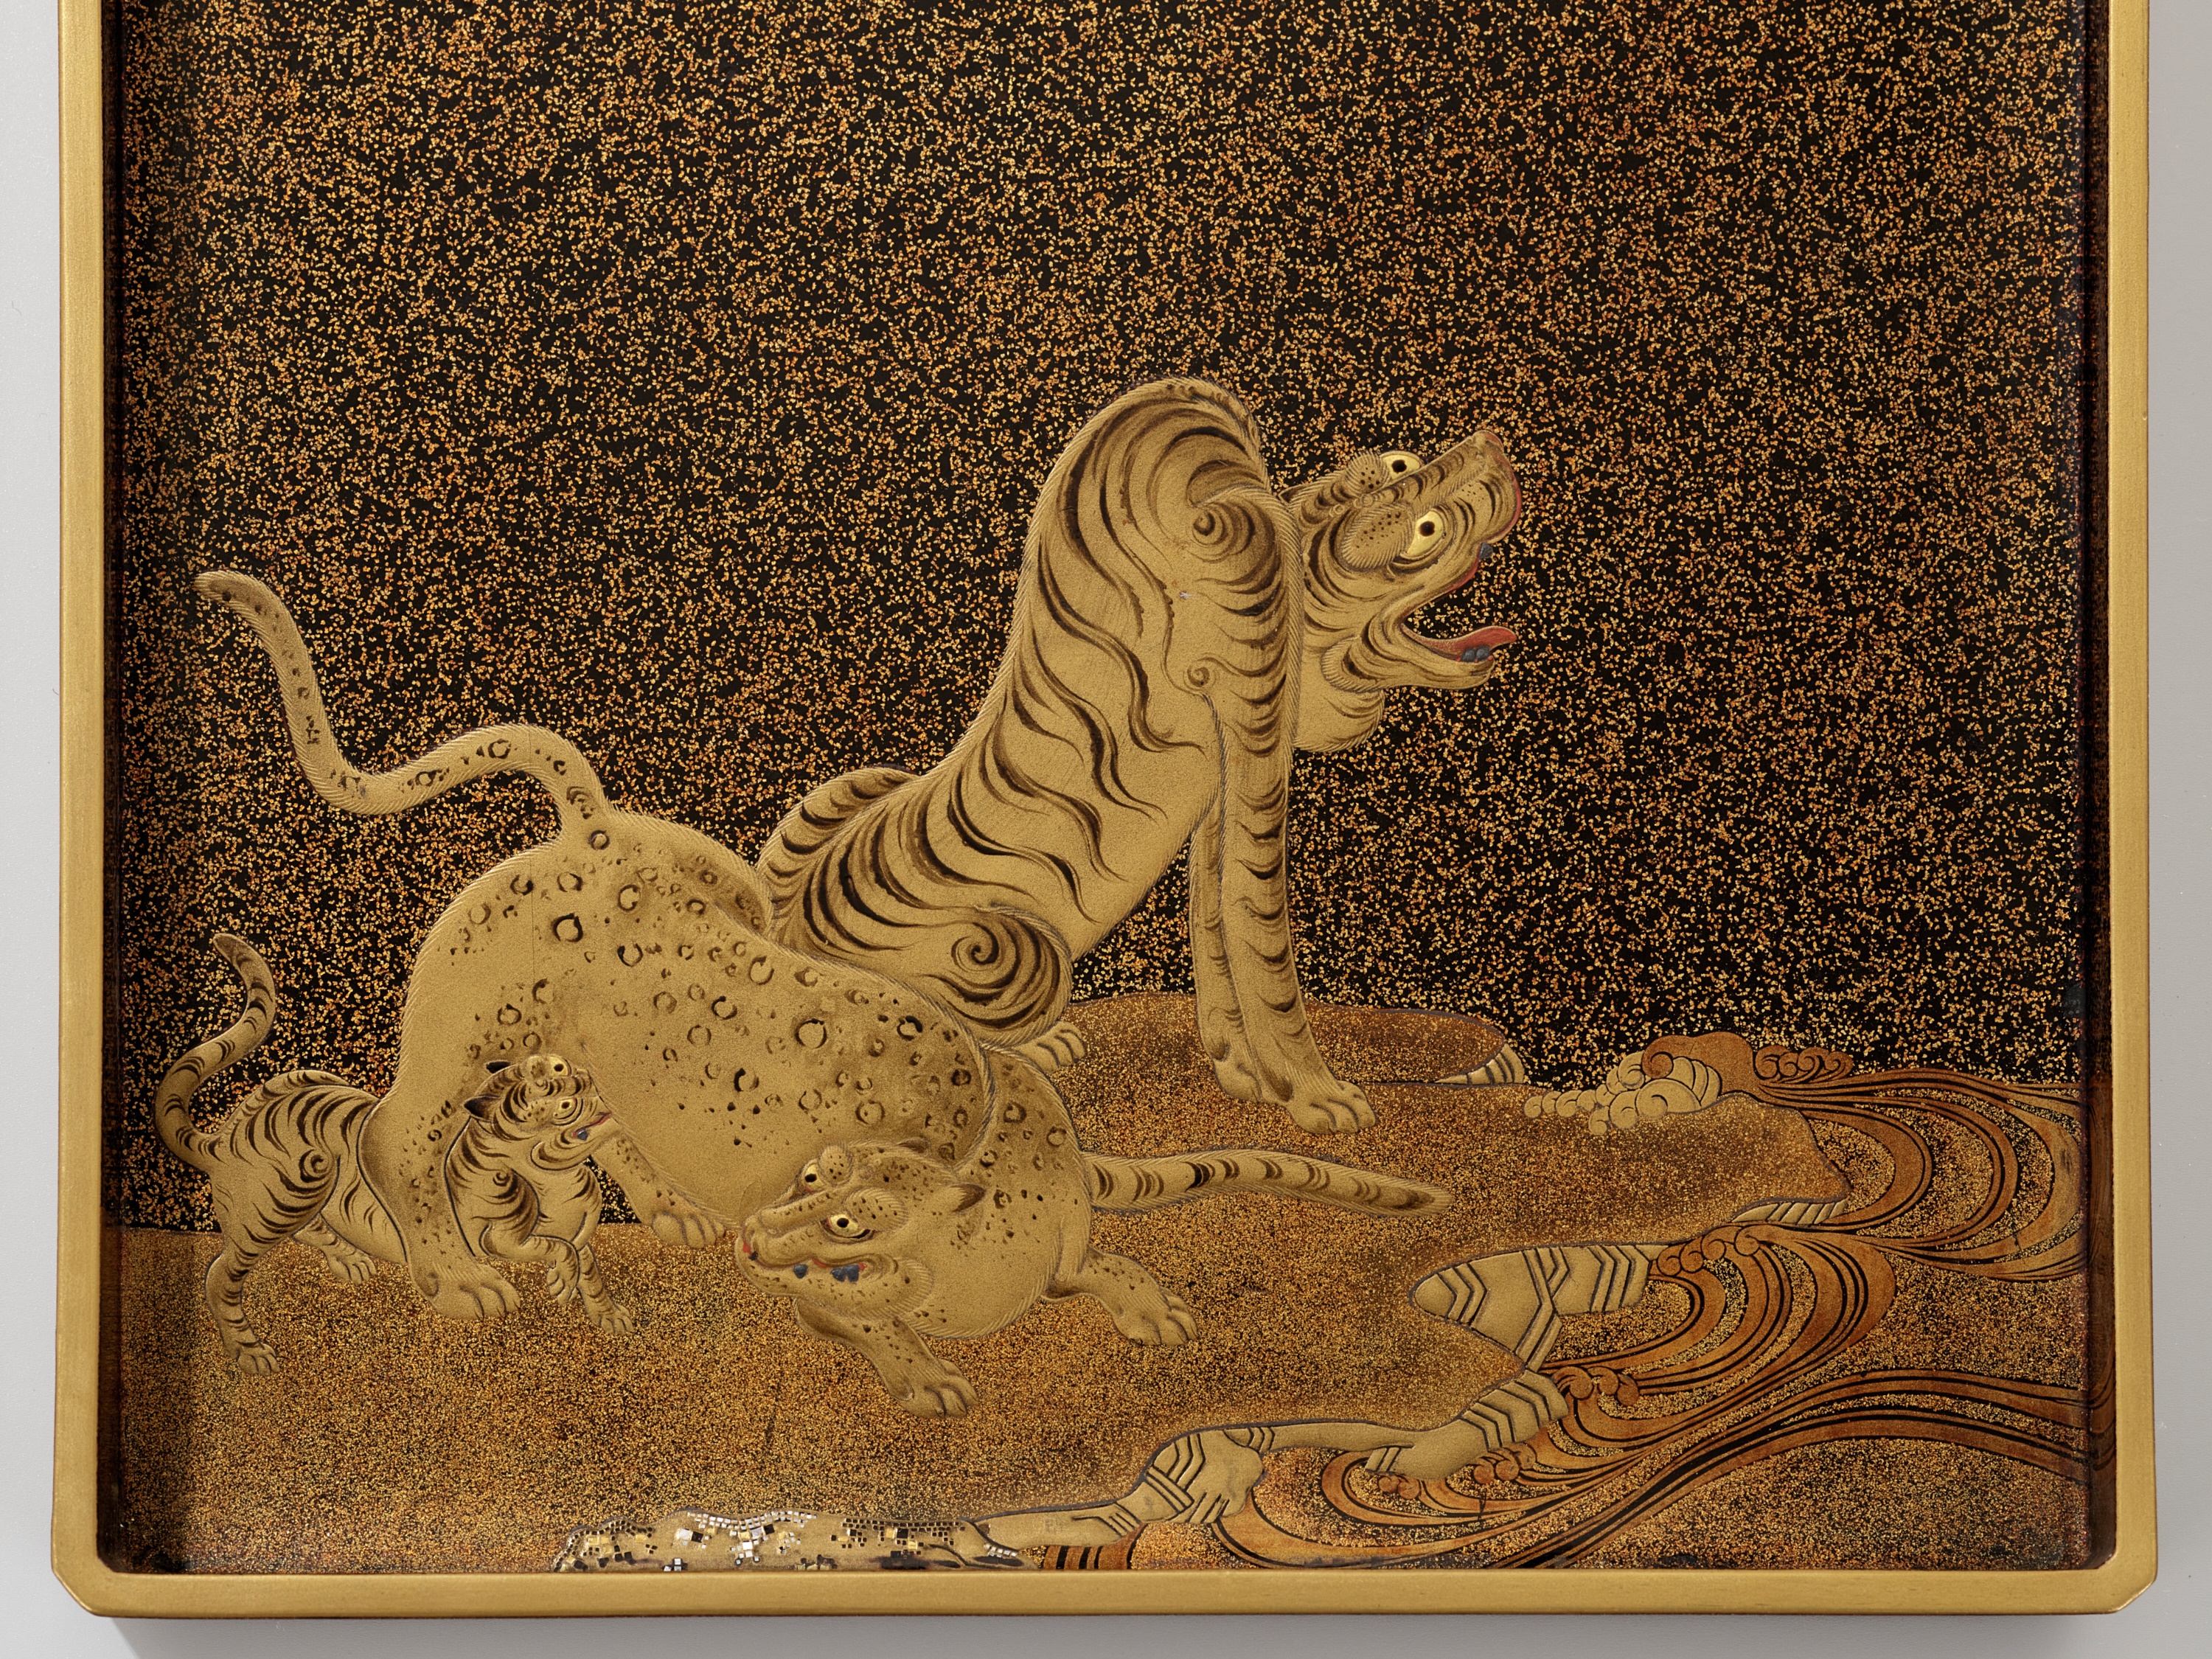 A FINE AND RARE GOLD LACQUER SUZURIBAKO DEPICTING A DRAGON, TIGERS, AND A LEOPARD (FEMALE TIGER) - Image 3 of 12